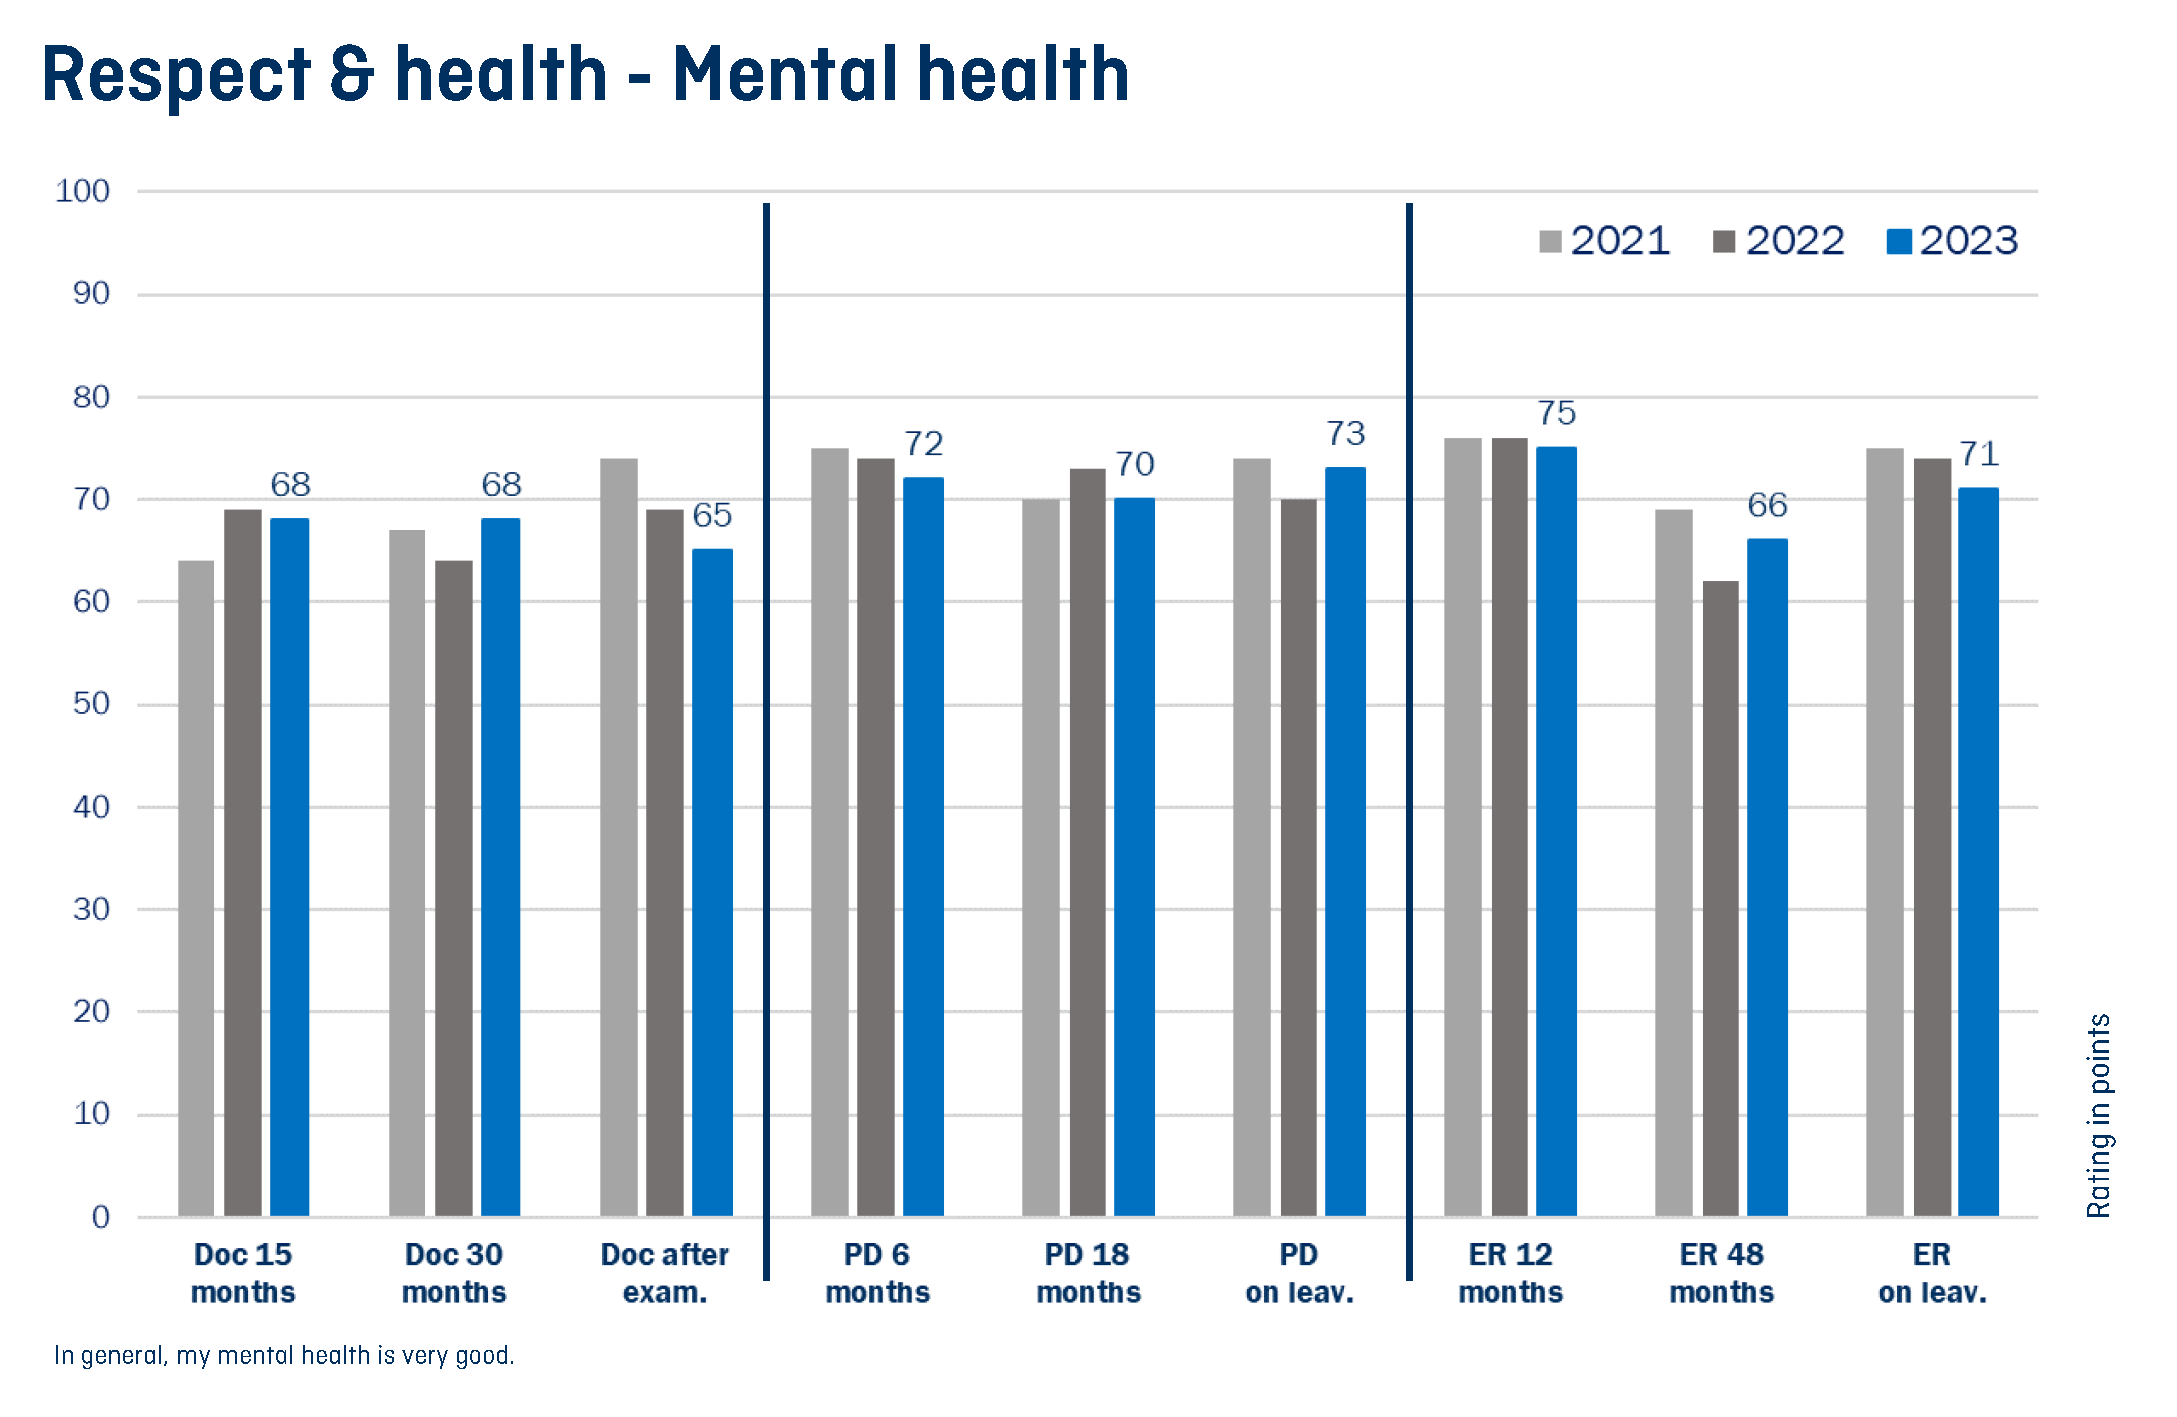 Enlarged view: Chart showing mental health for different employment positions over the years 2021, 2022 and 2023.